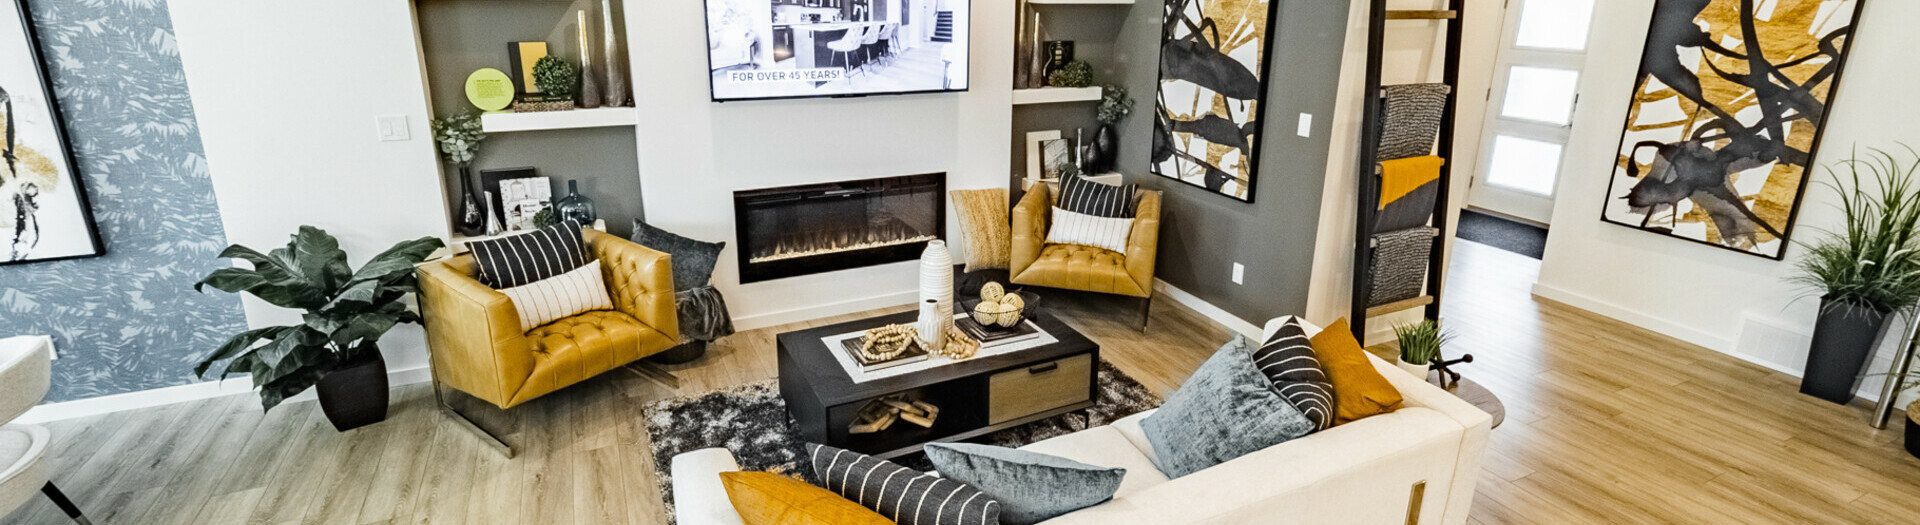 Living room in the Ruby showhome in the community of Hills at Charlesworth in Edmonton, Alberta.